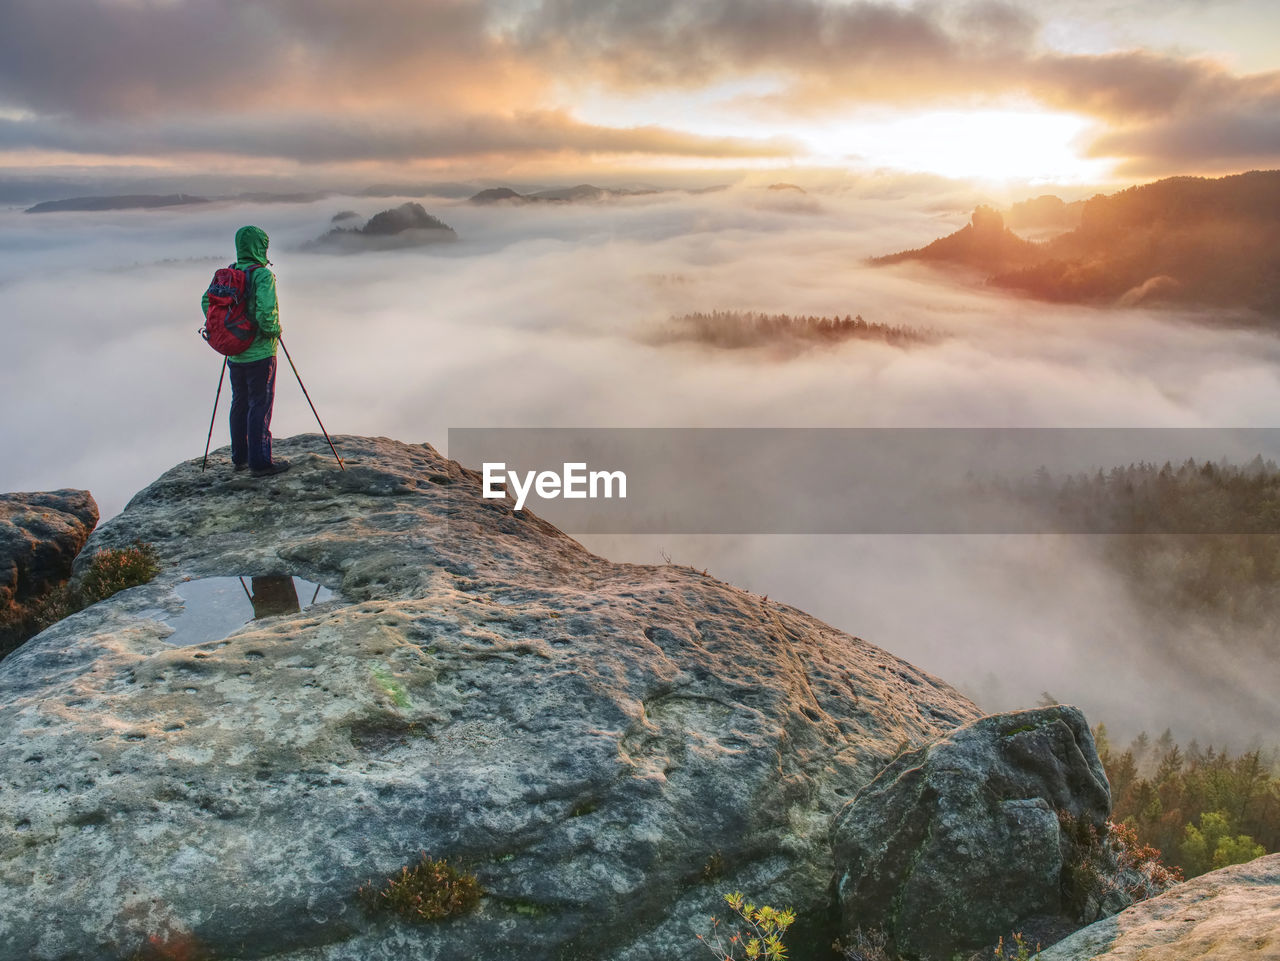 Emale hiker enjoying the view on the soutern rim of saxony switzerland within extreme autumn weather